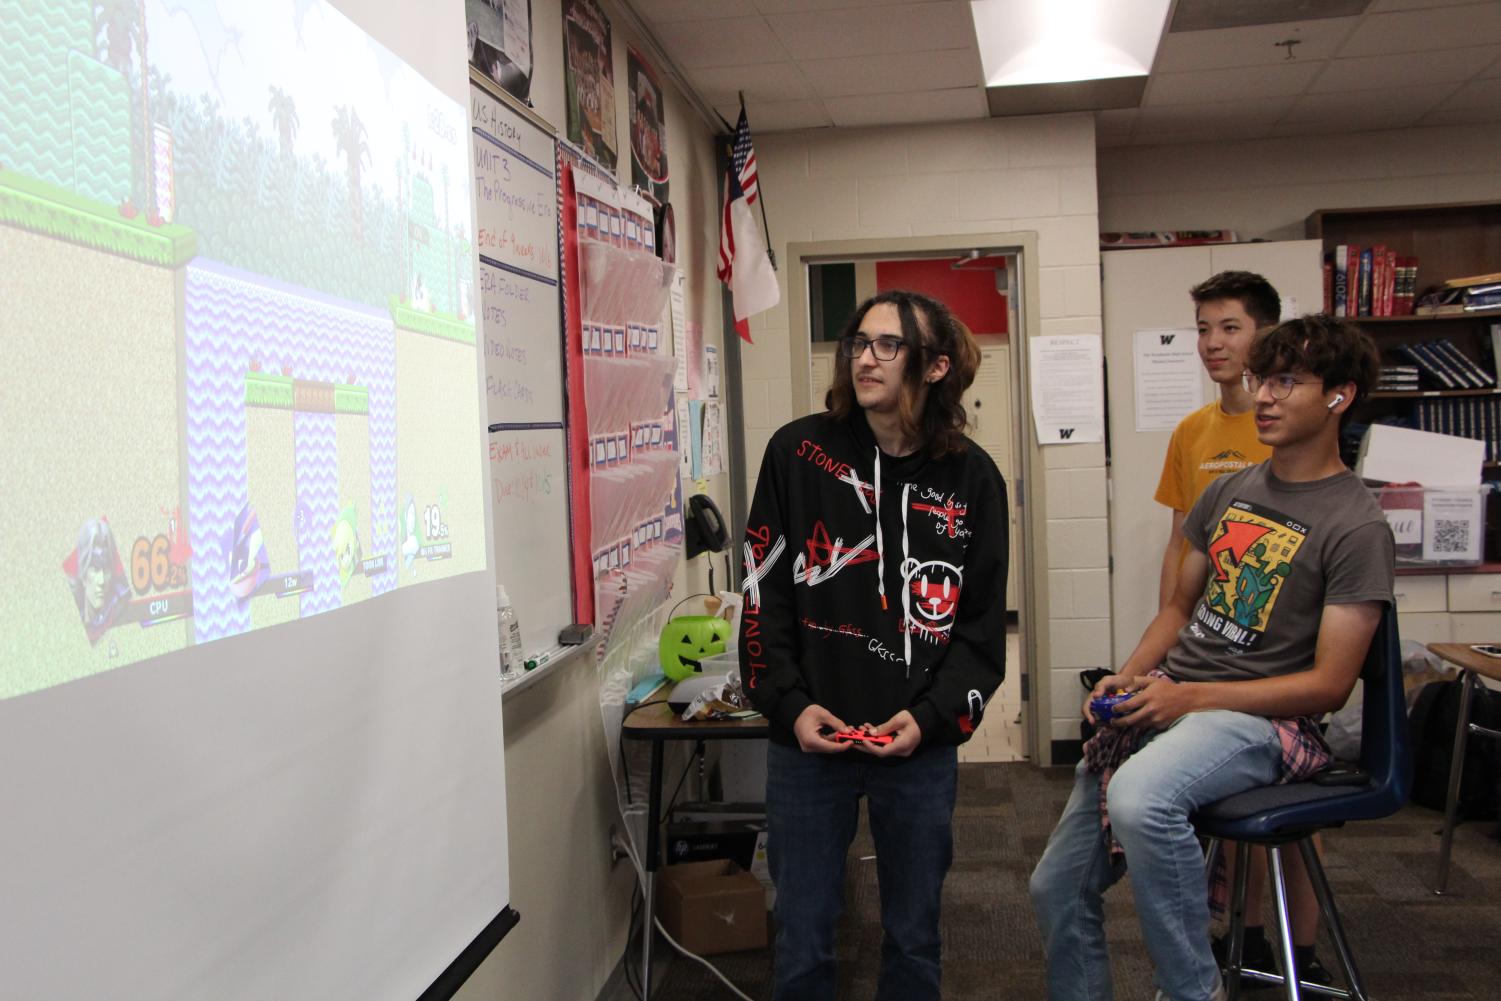 From left, Brian Bostad, Kevin Smith and Max Basurto play Super Smash Bros. in room 241 on Sept. 20.